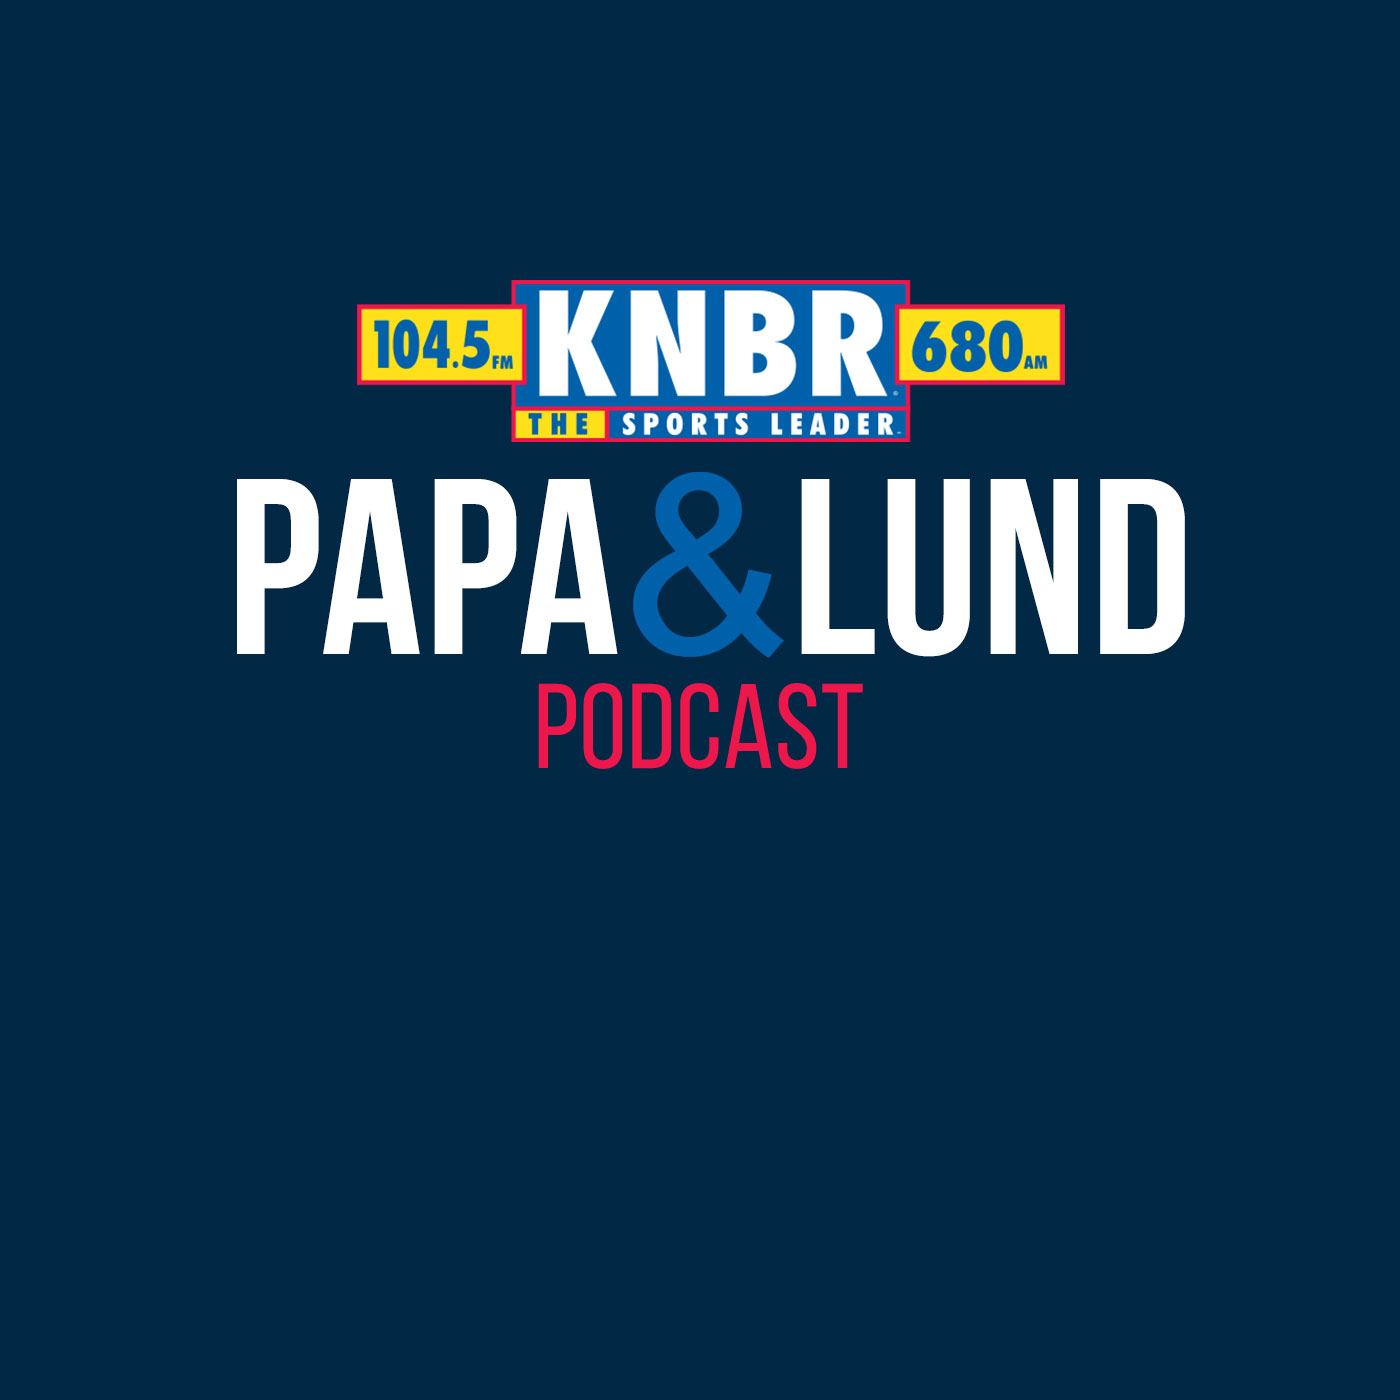 3-31 Andrew Baggarly joins Papa & Lund to discuss the disappointing offensive performance on Opening Day and discuss some of the roster choices for the team to start the season